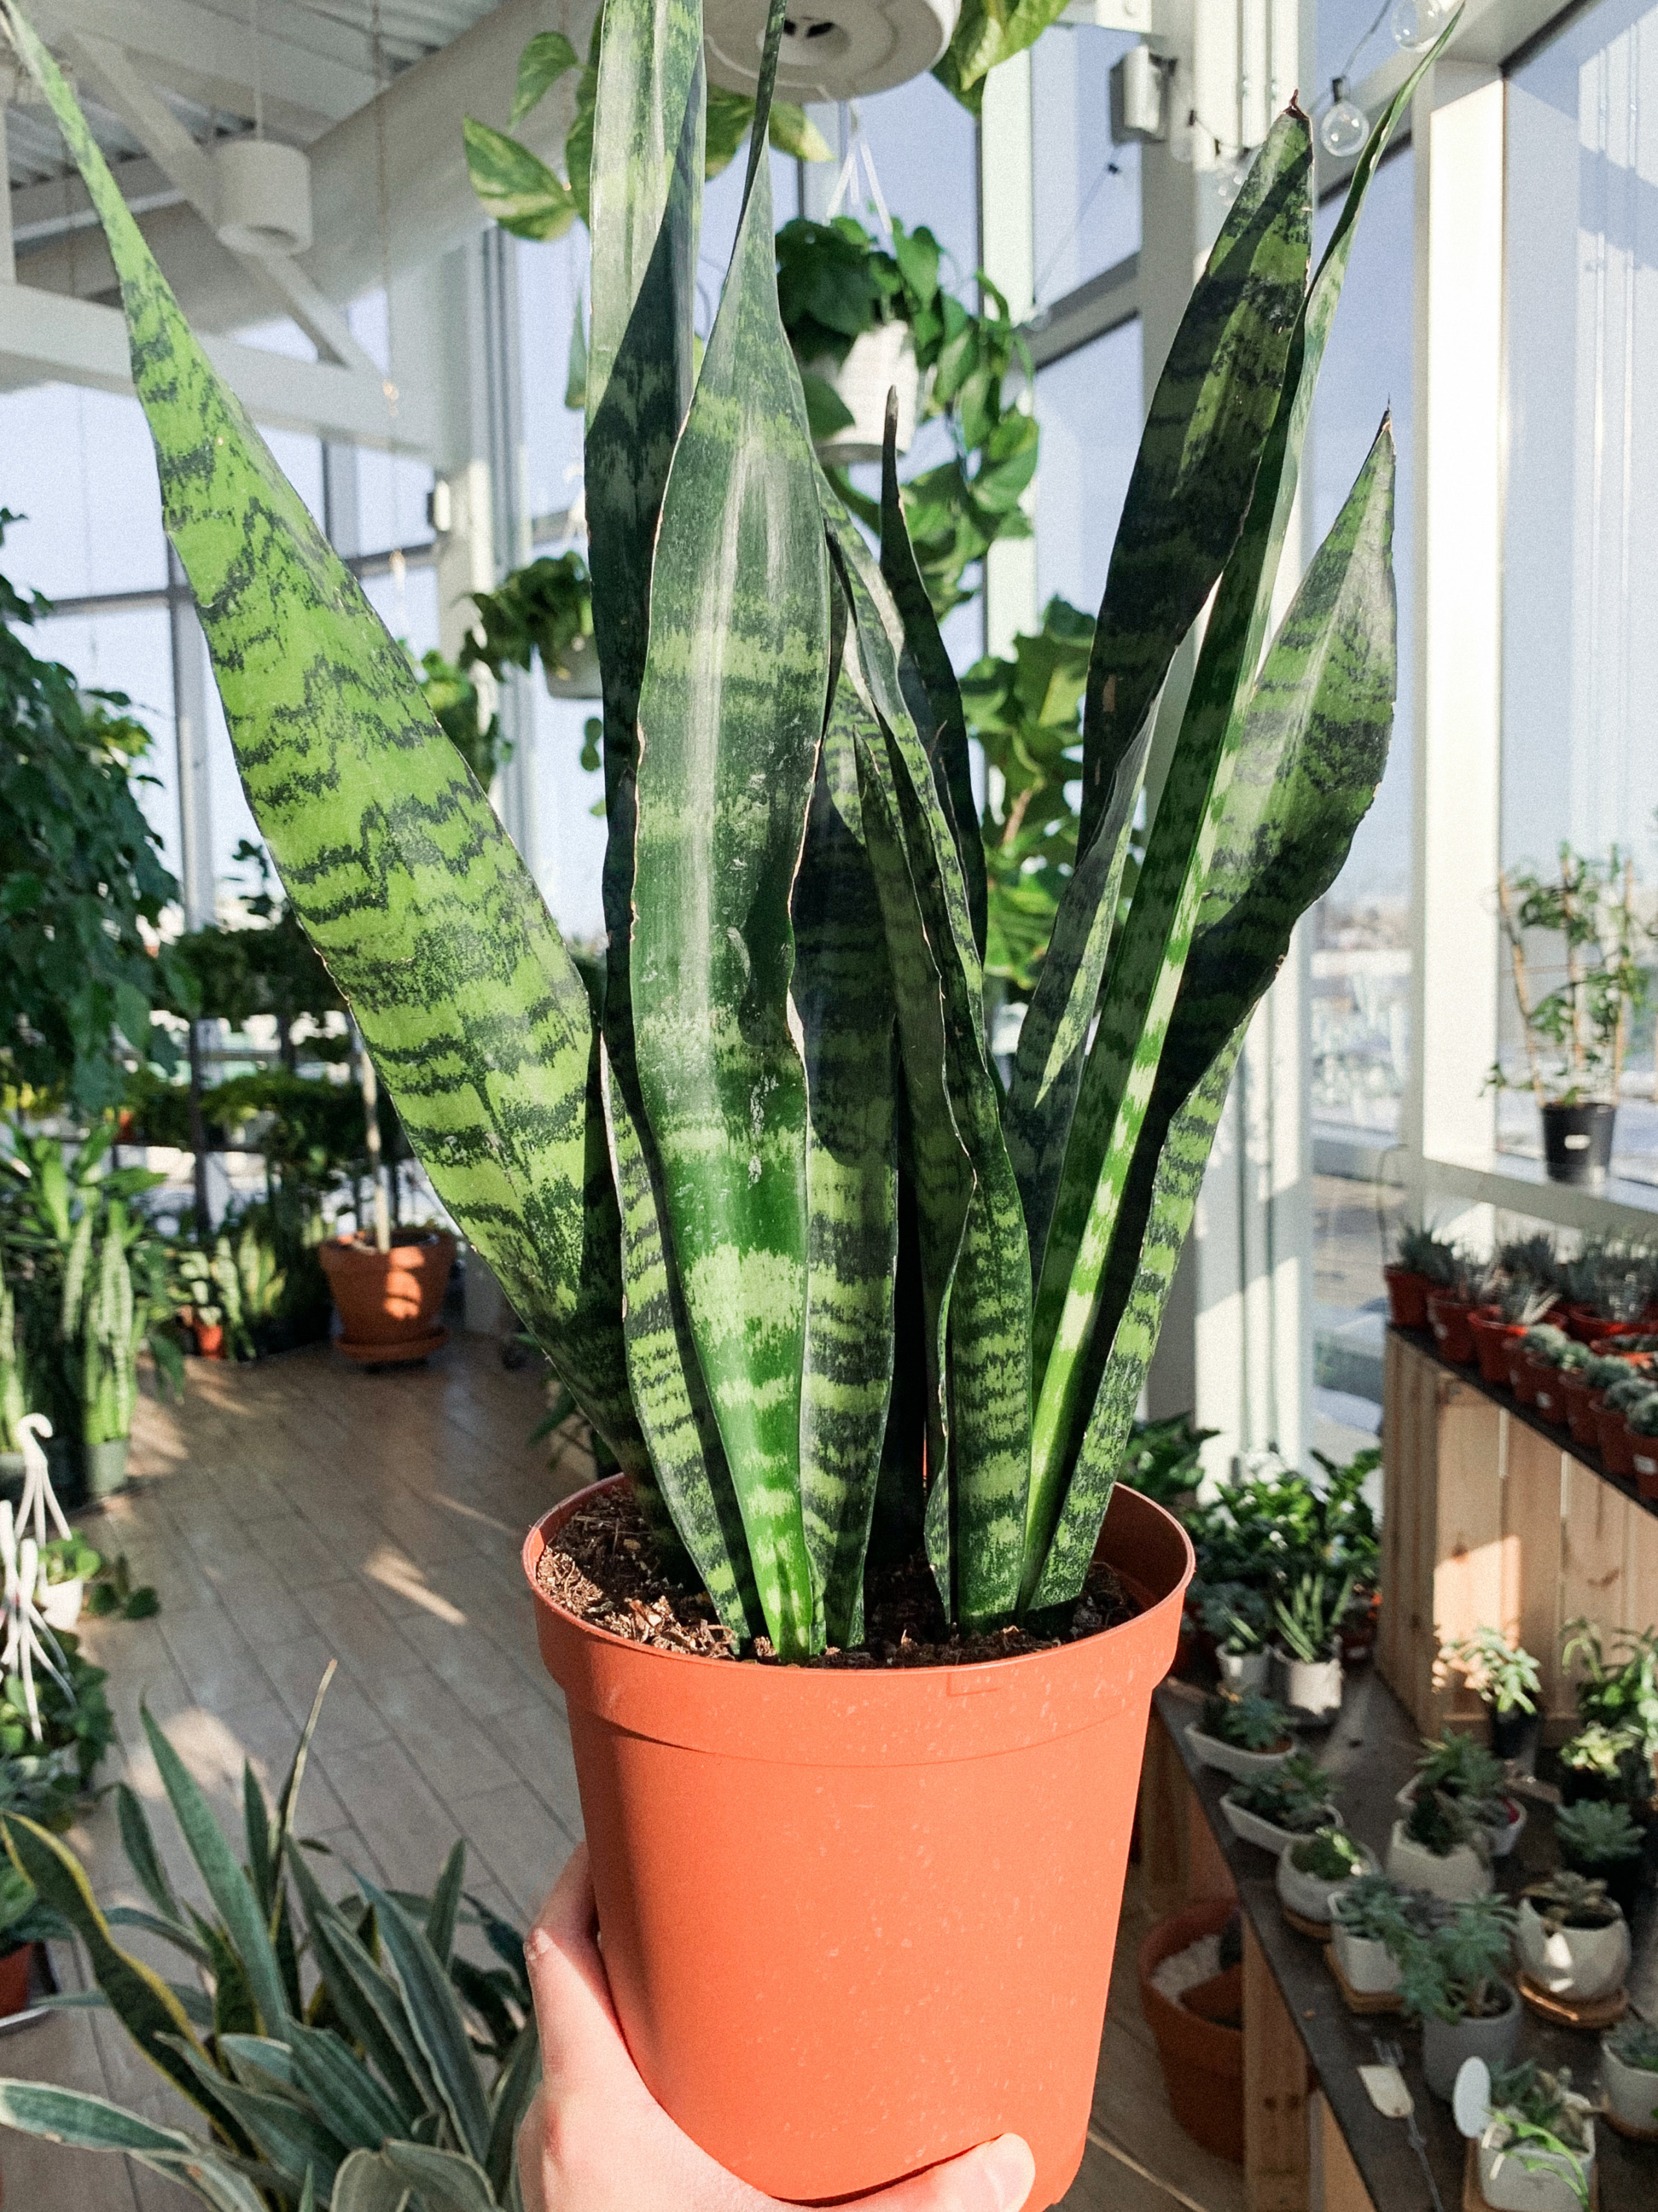 When to Water Sansevieria(Snake Plant) – How Much, Often?